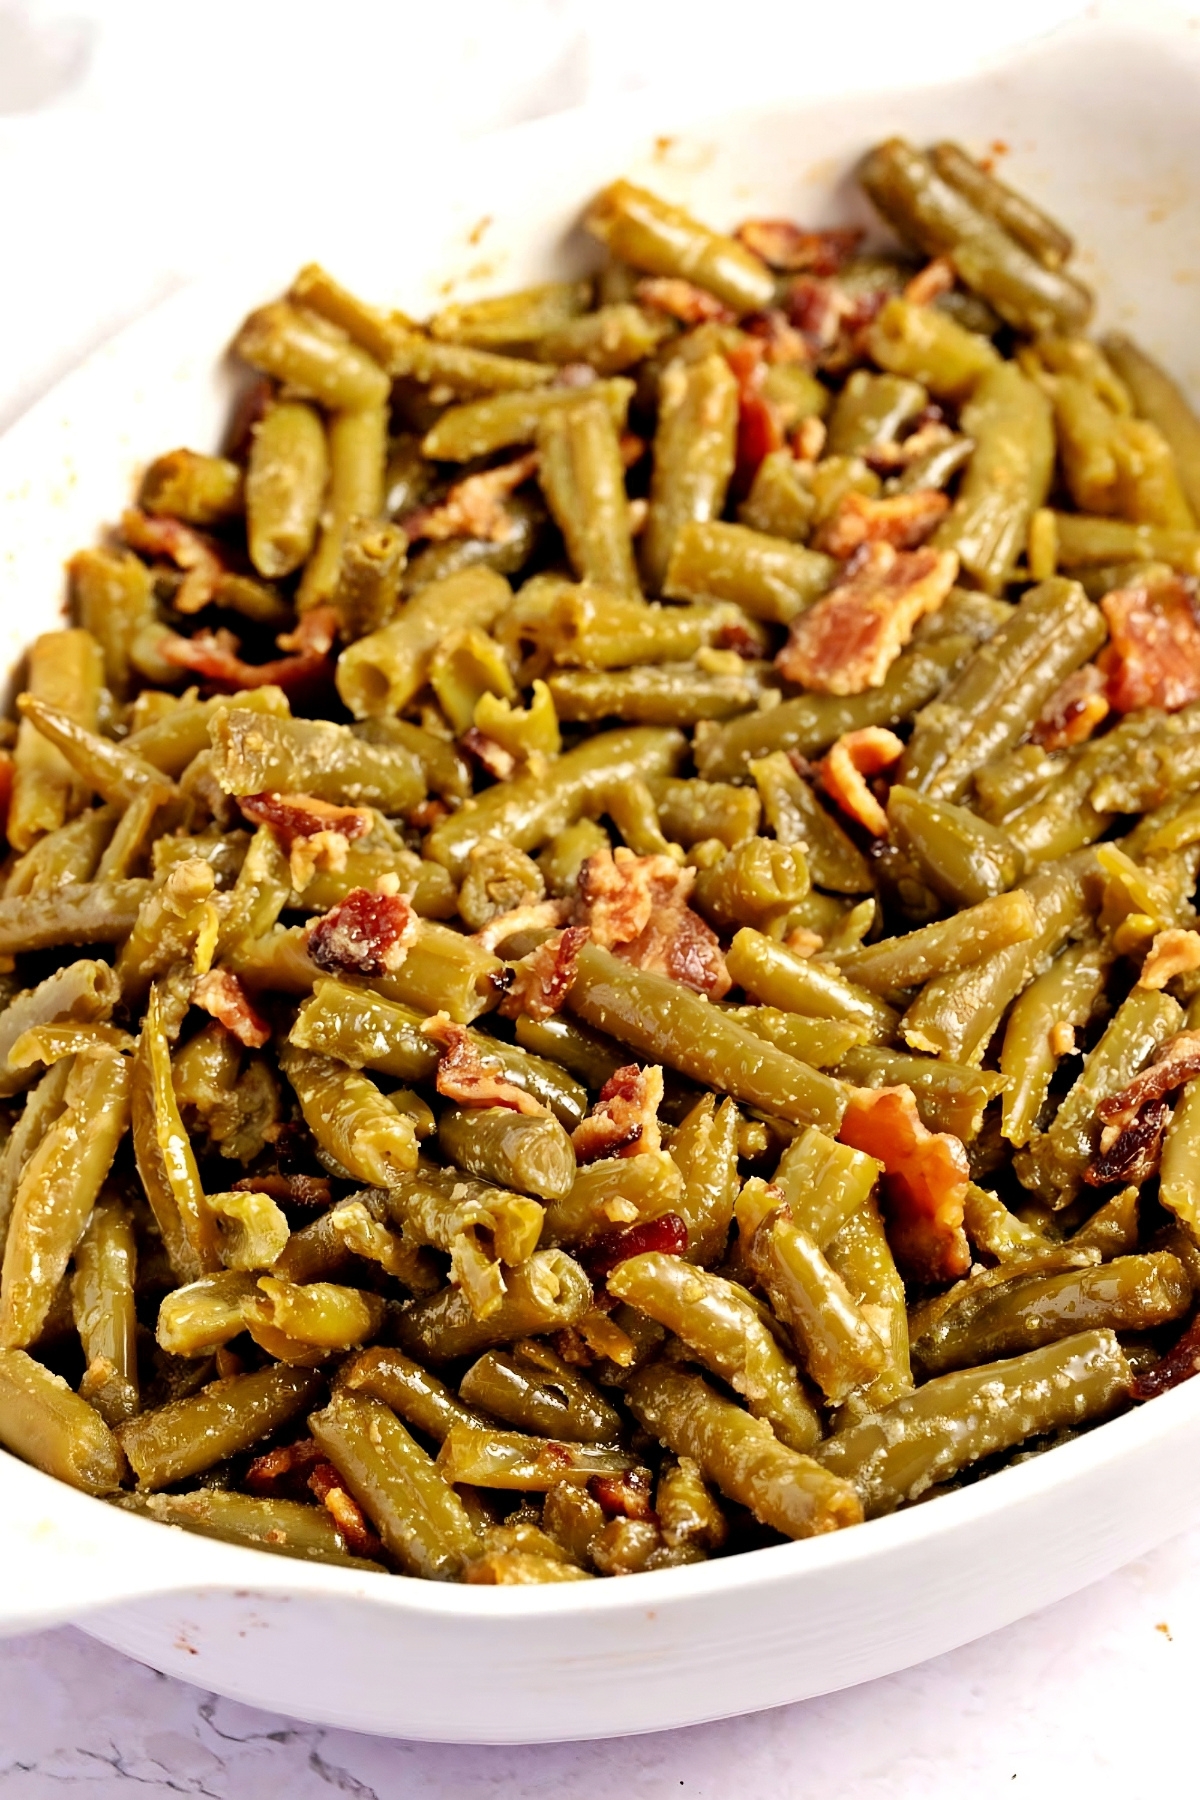 Green beans with butter and crispy bacon on a casserole dish.